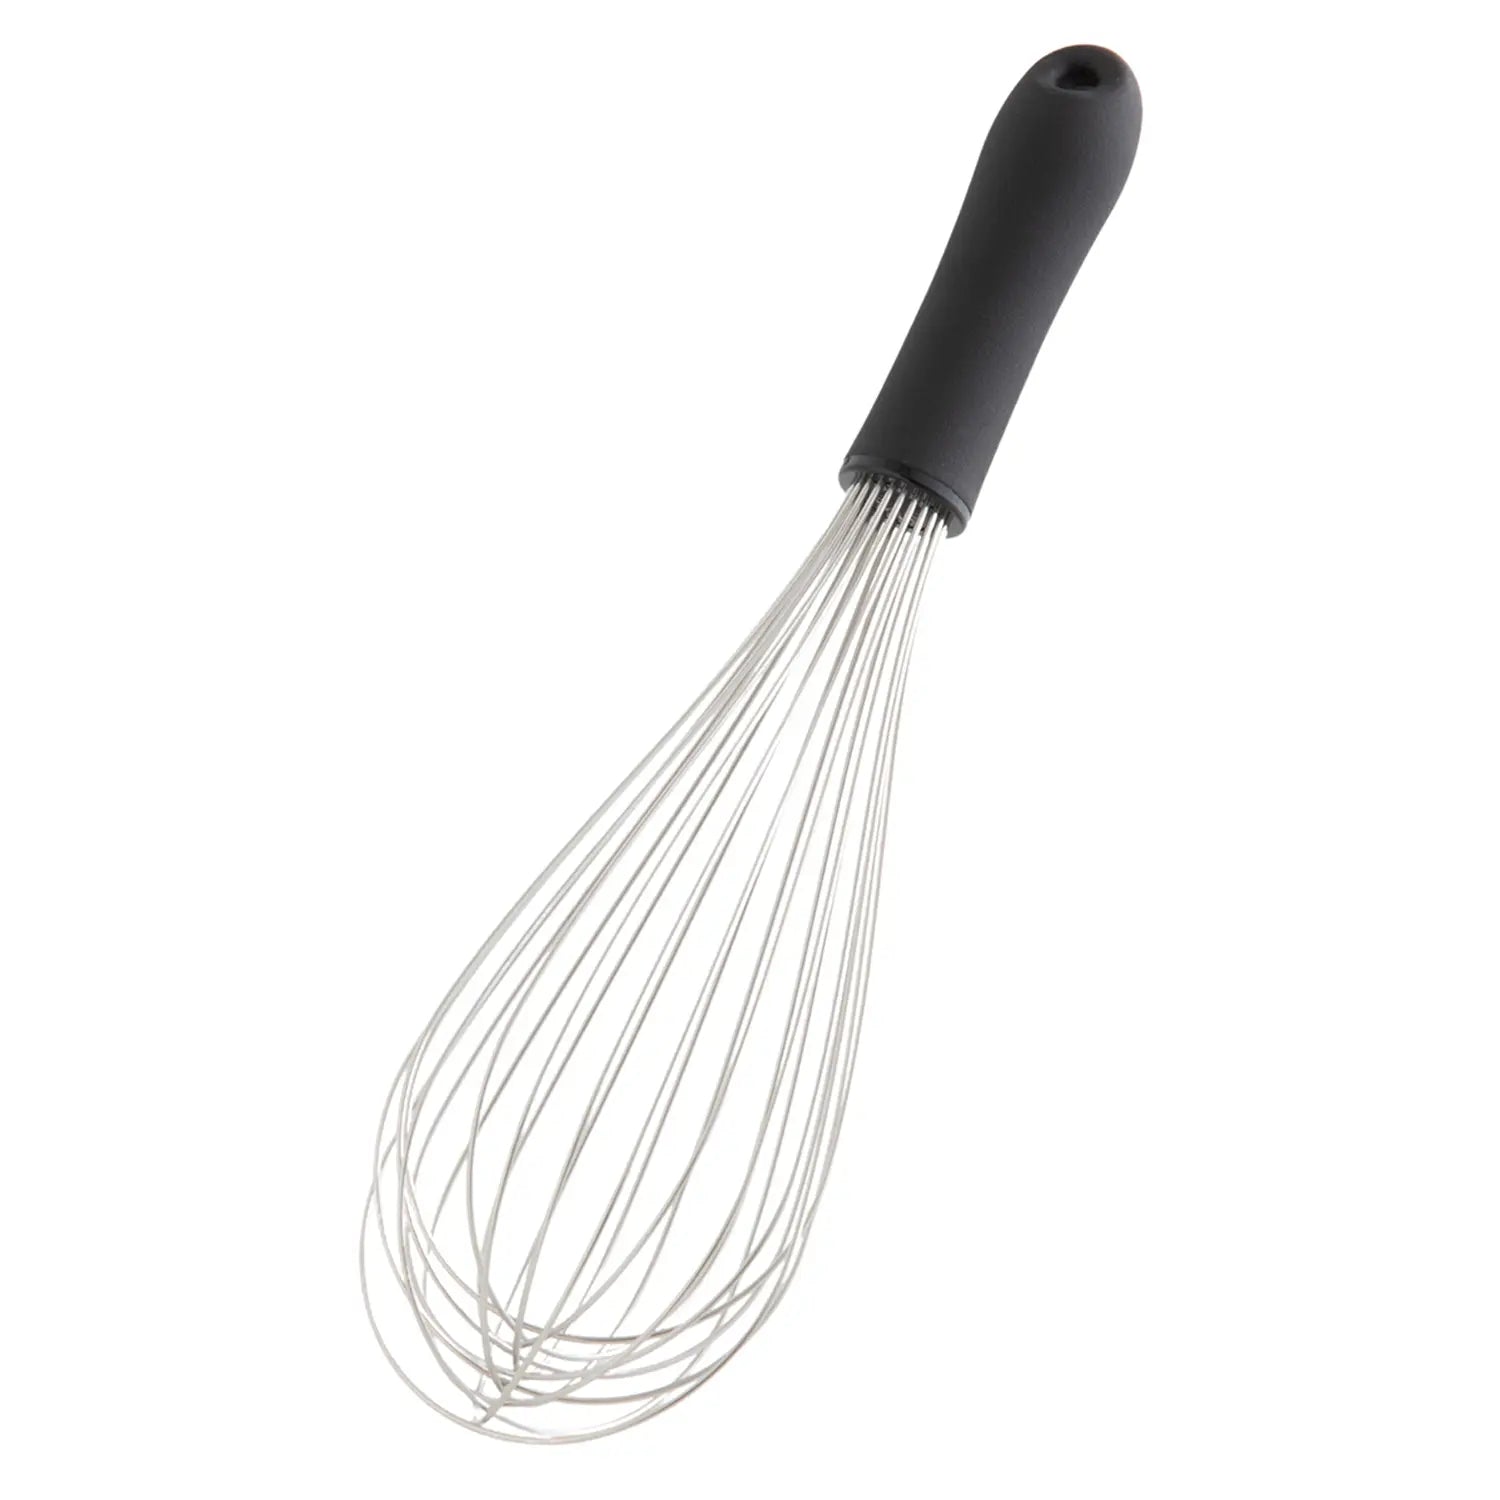 Collapsible Whisk - Brilliant Promos - Be Brilliant!